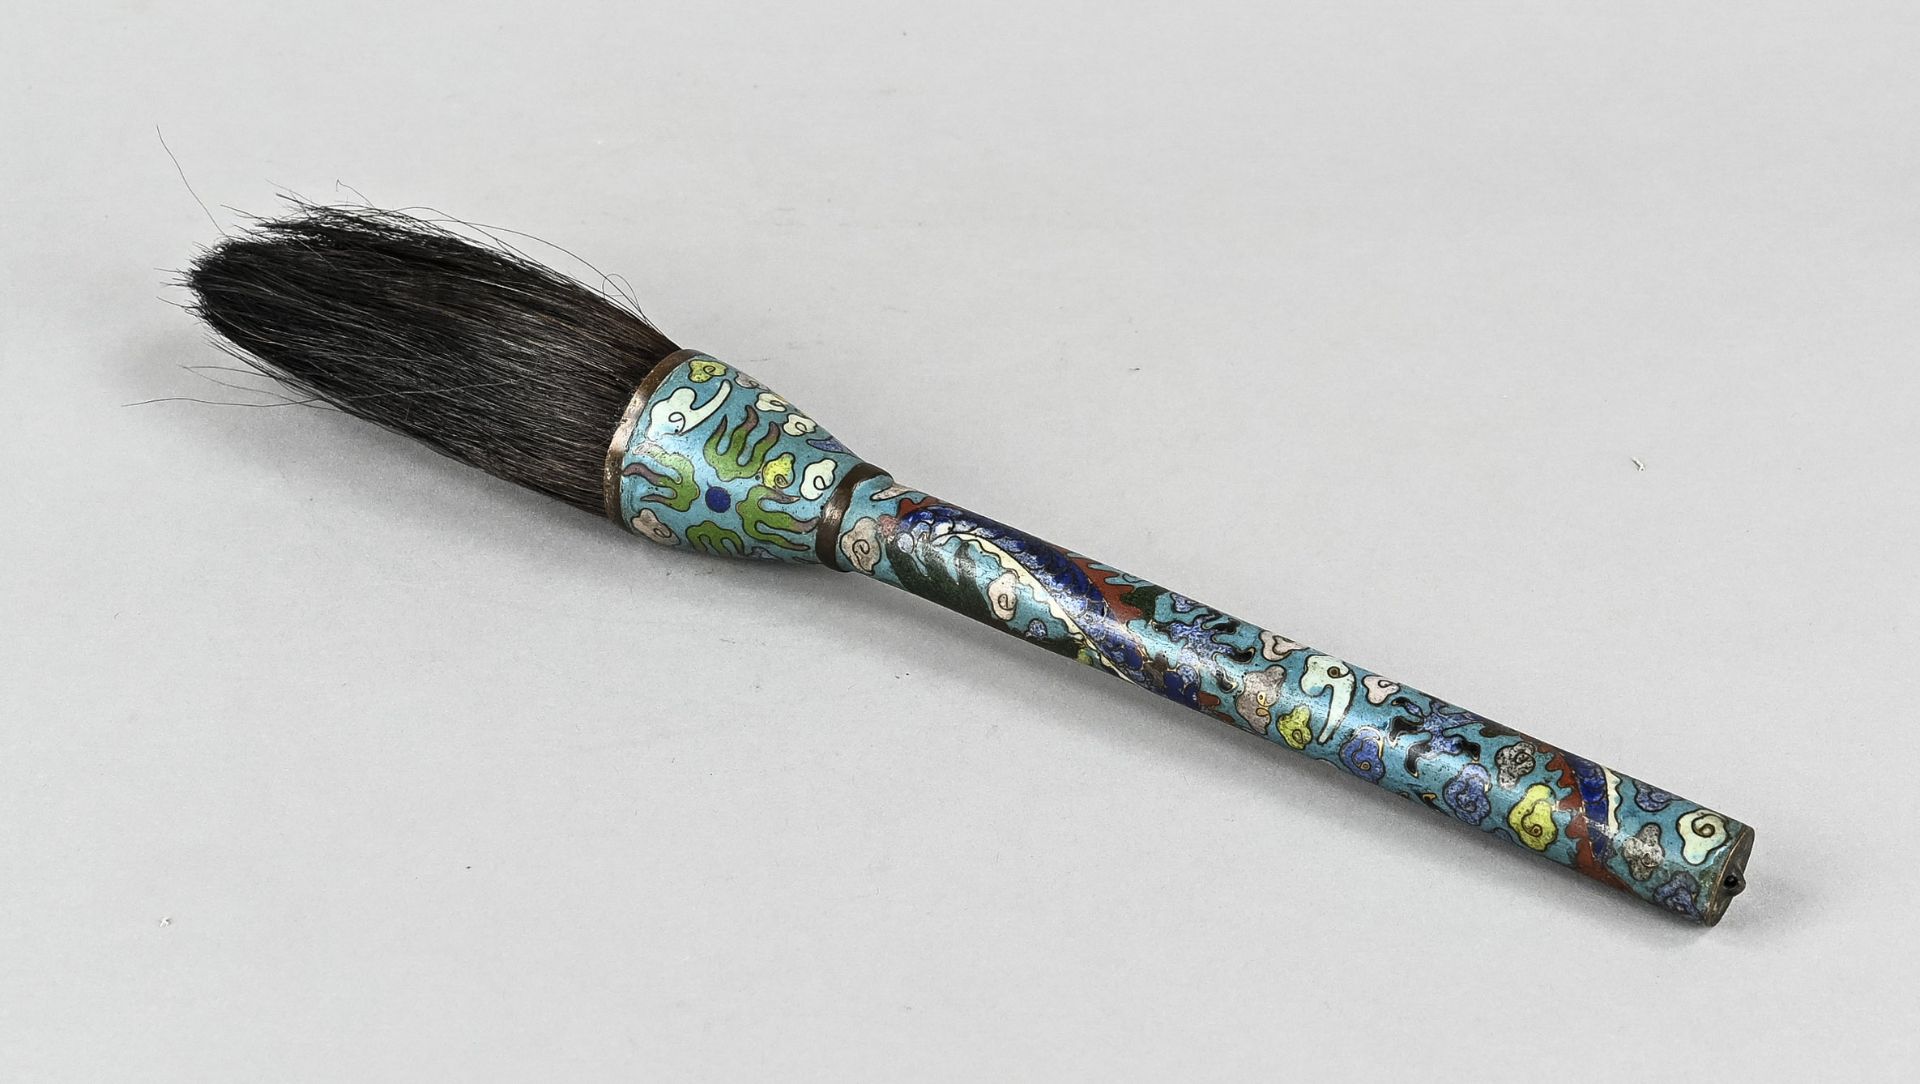 Calligraphy brushes, China, painting brushes, Chinese writing brushes made of real hair, handle in 